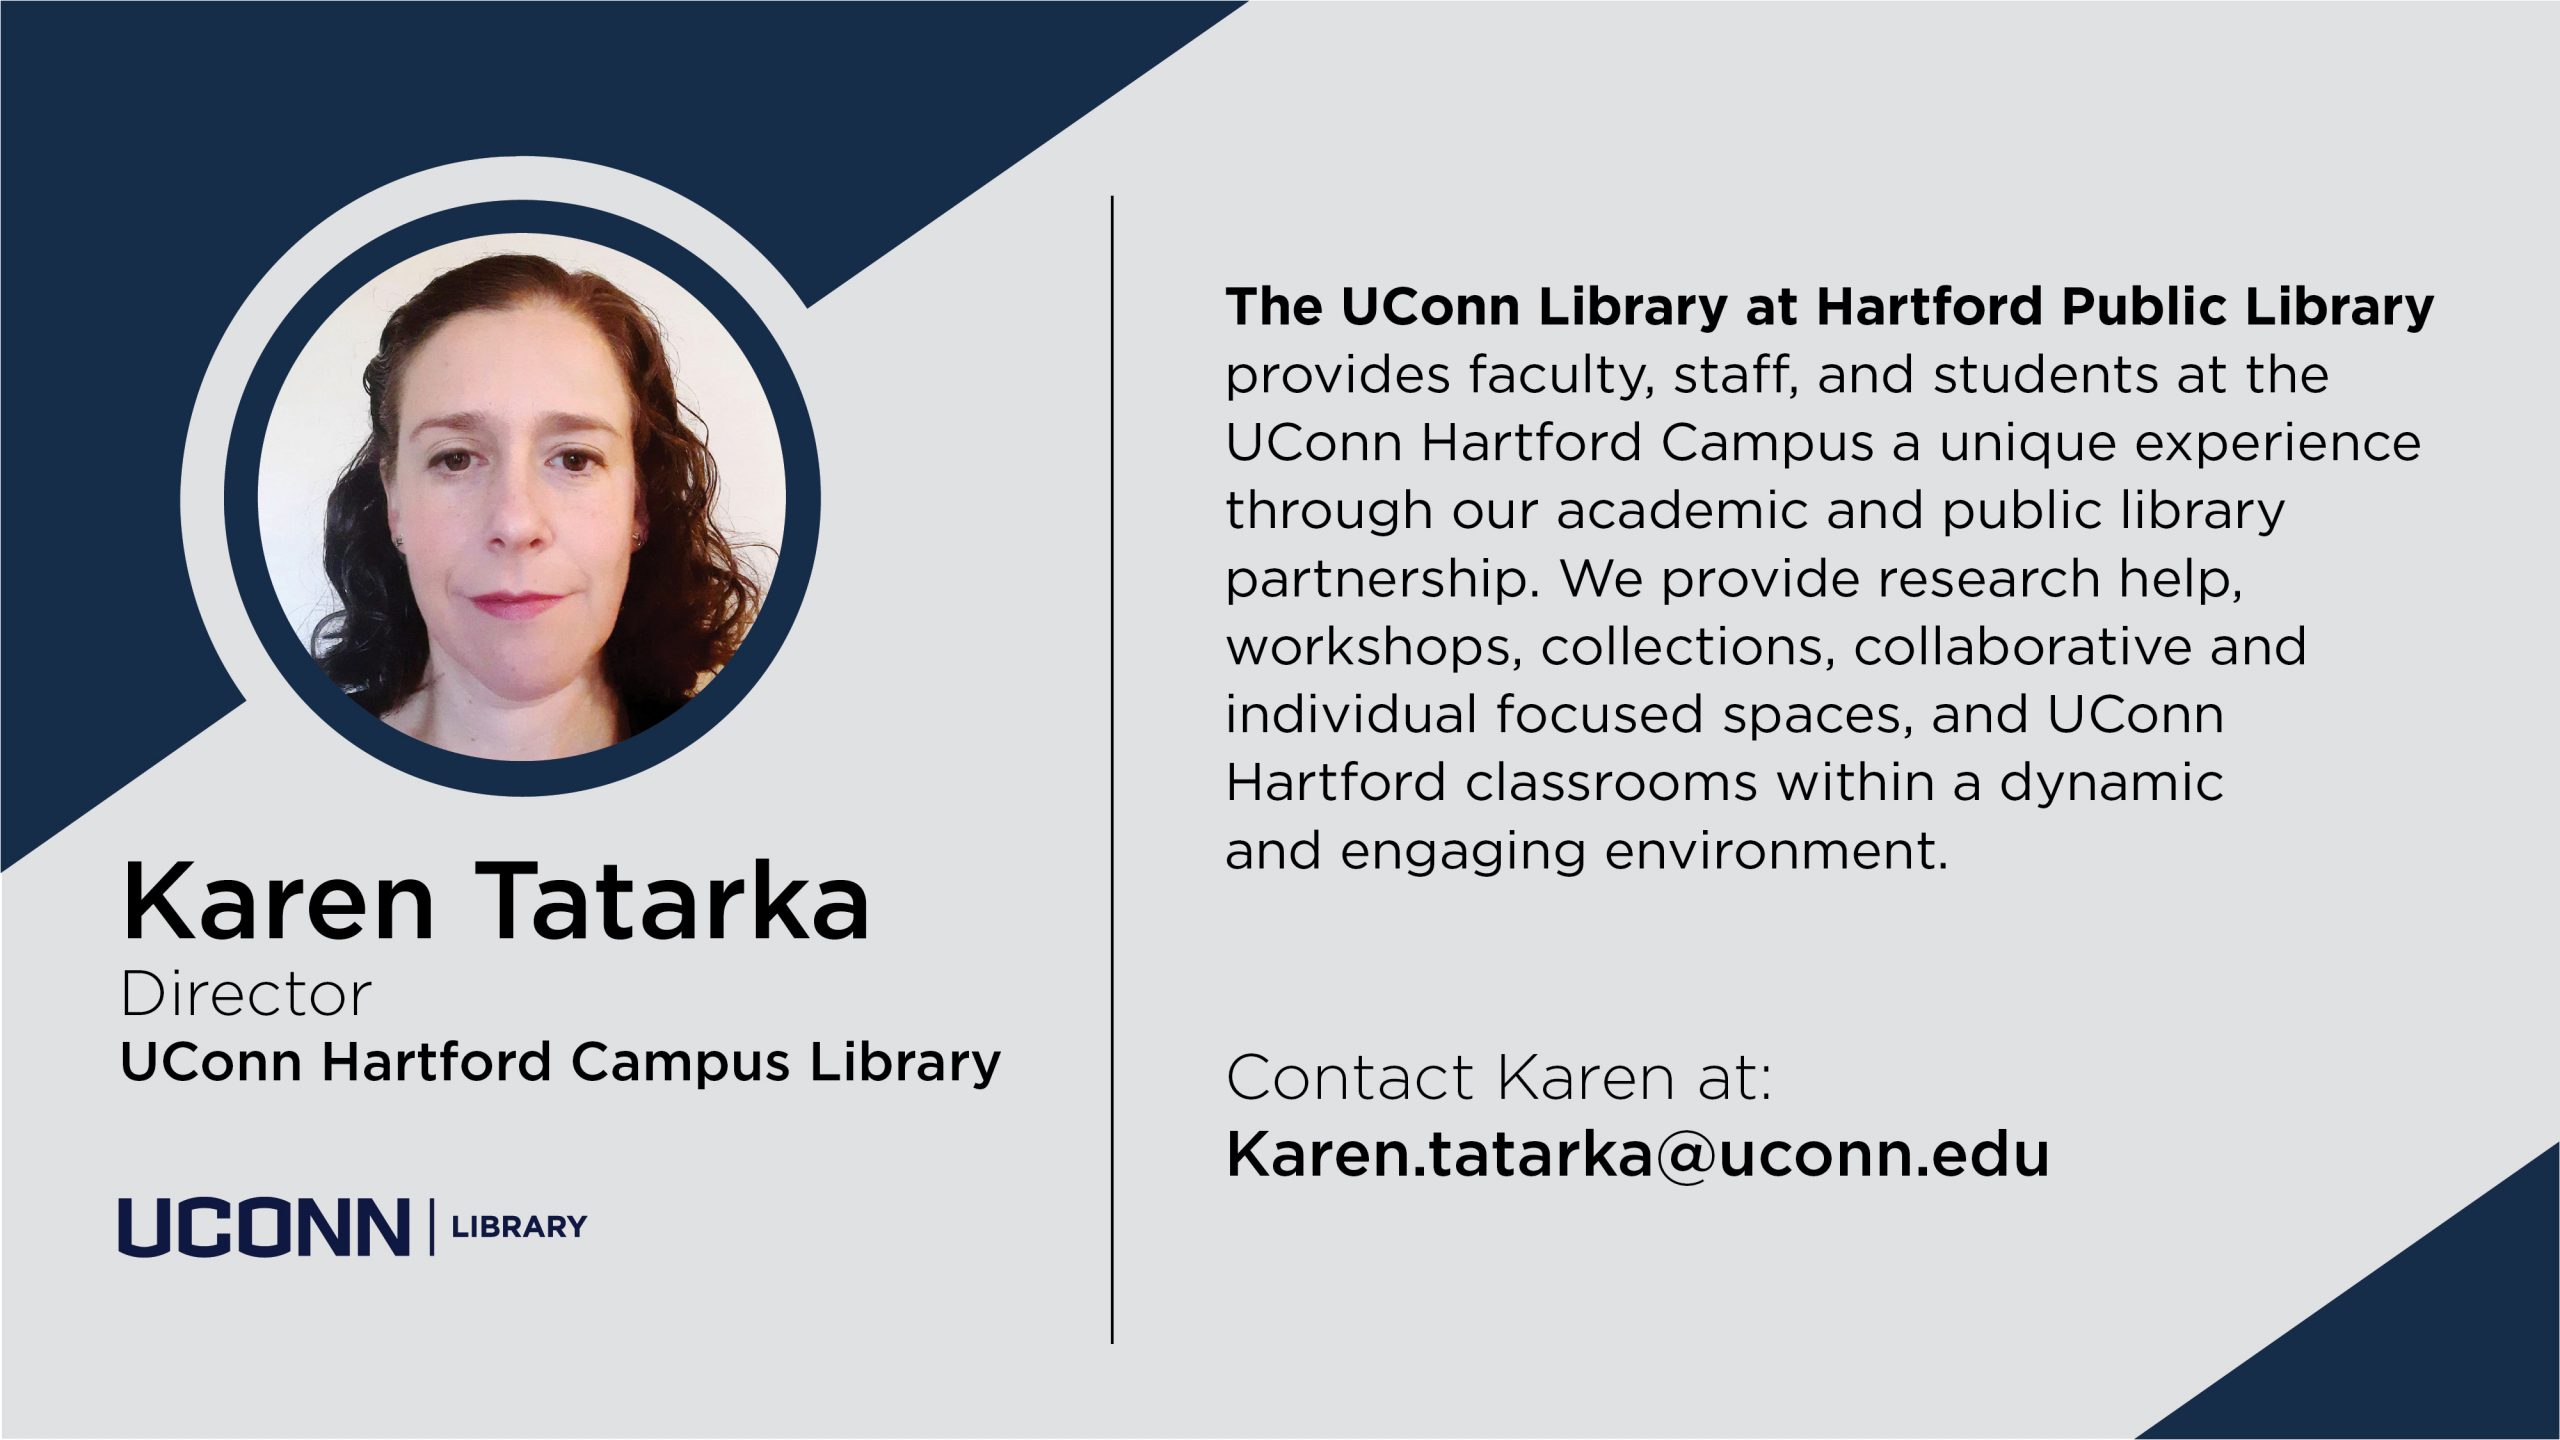 Staff marketing screen with image of Karen Tatarka and UConn logo with the text: Karen Tatarka, Director, UConn Hartford Campus Library. The UConn Library at Hartford Public Library provides faculty, staff, and students at the UConn Hartford Campus a unique experience through our academic and public library partnership. We provide research help, workshops, collections, collaborative and individual focused spaces, and UConn Hartford classrooms within a dynamic and engaging environment. Contact Karen at: Karen.tatarka@uconn.edu.